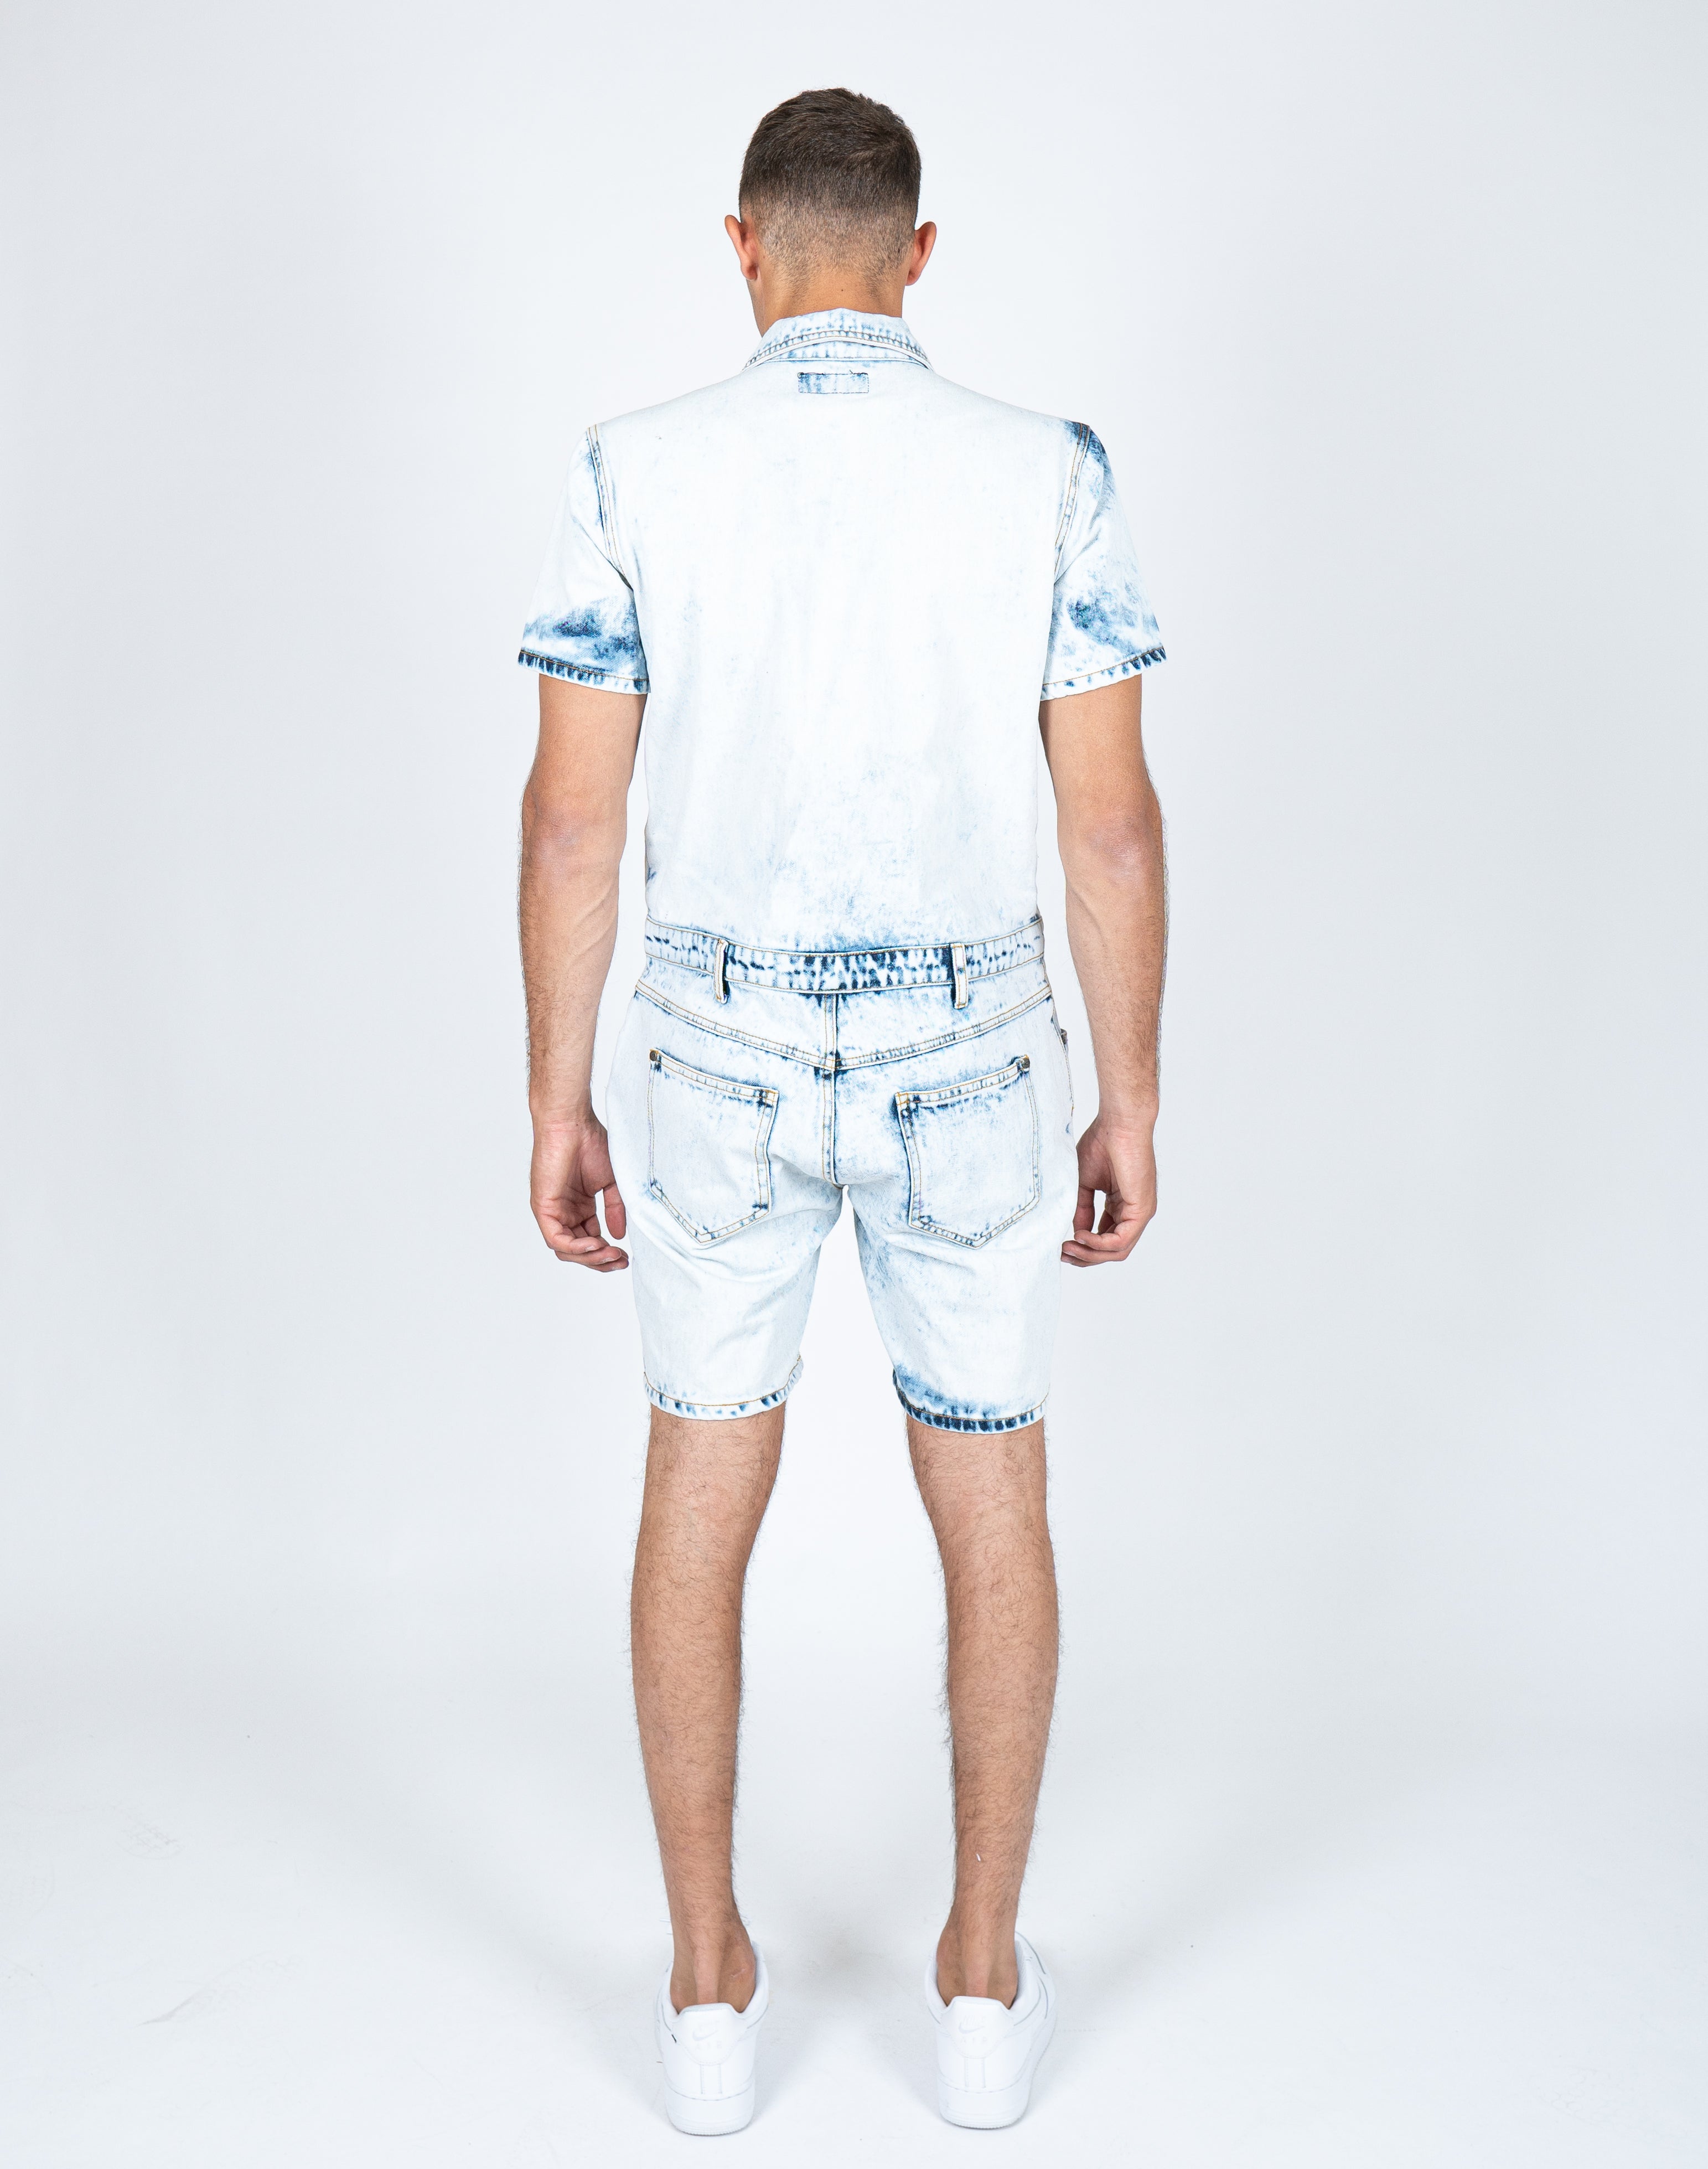 Tennessee Denim Overall Shorts in Cloud Wash